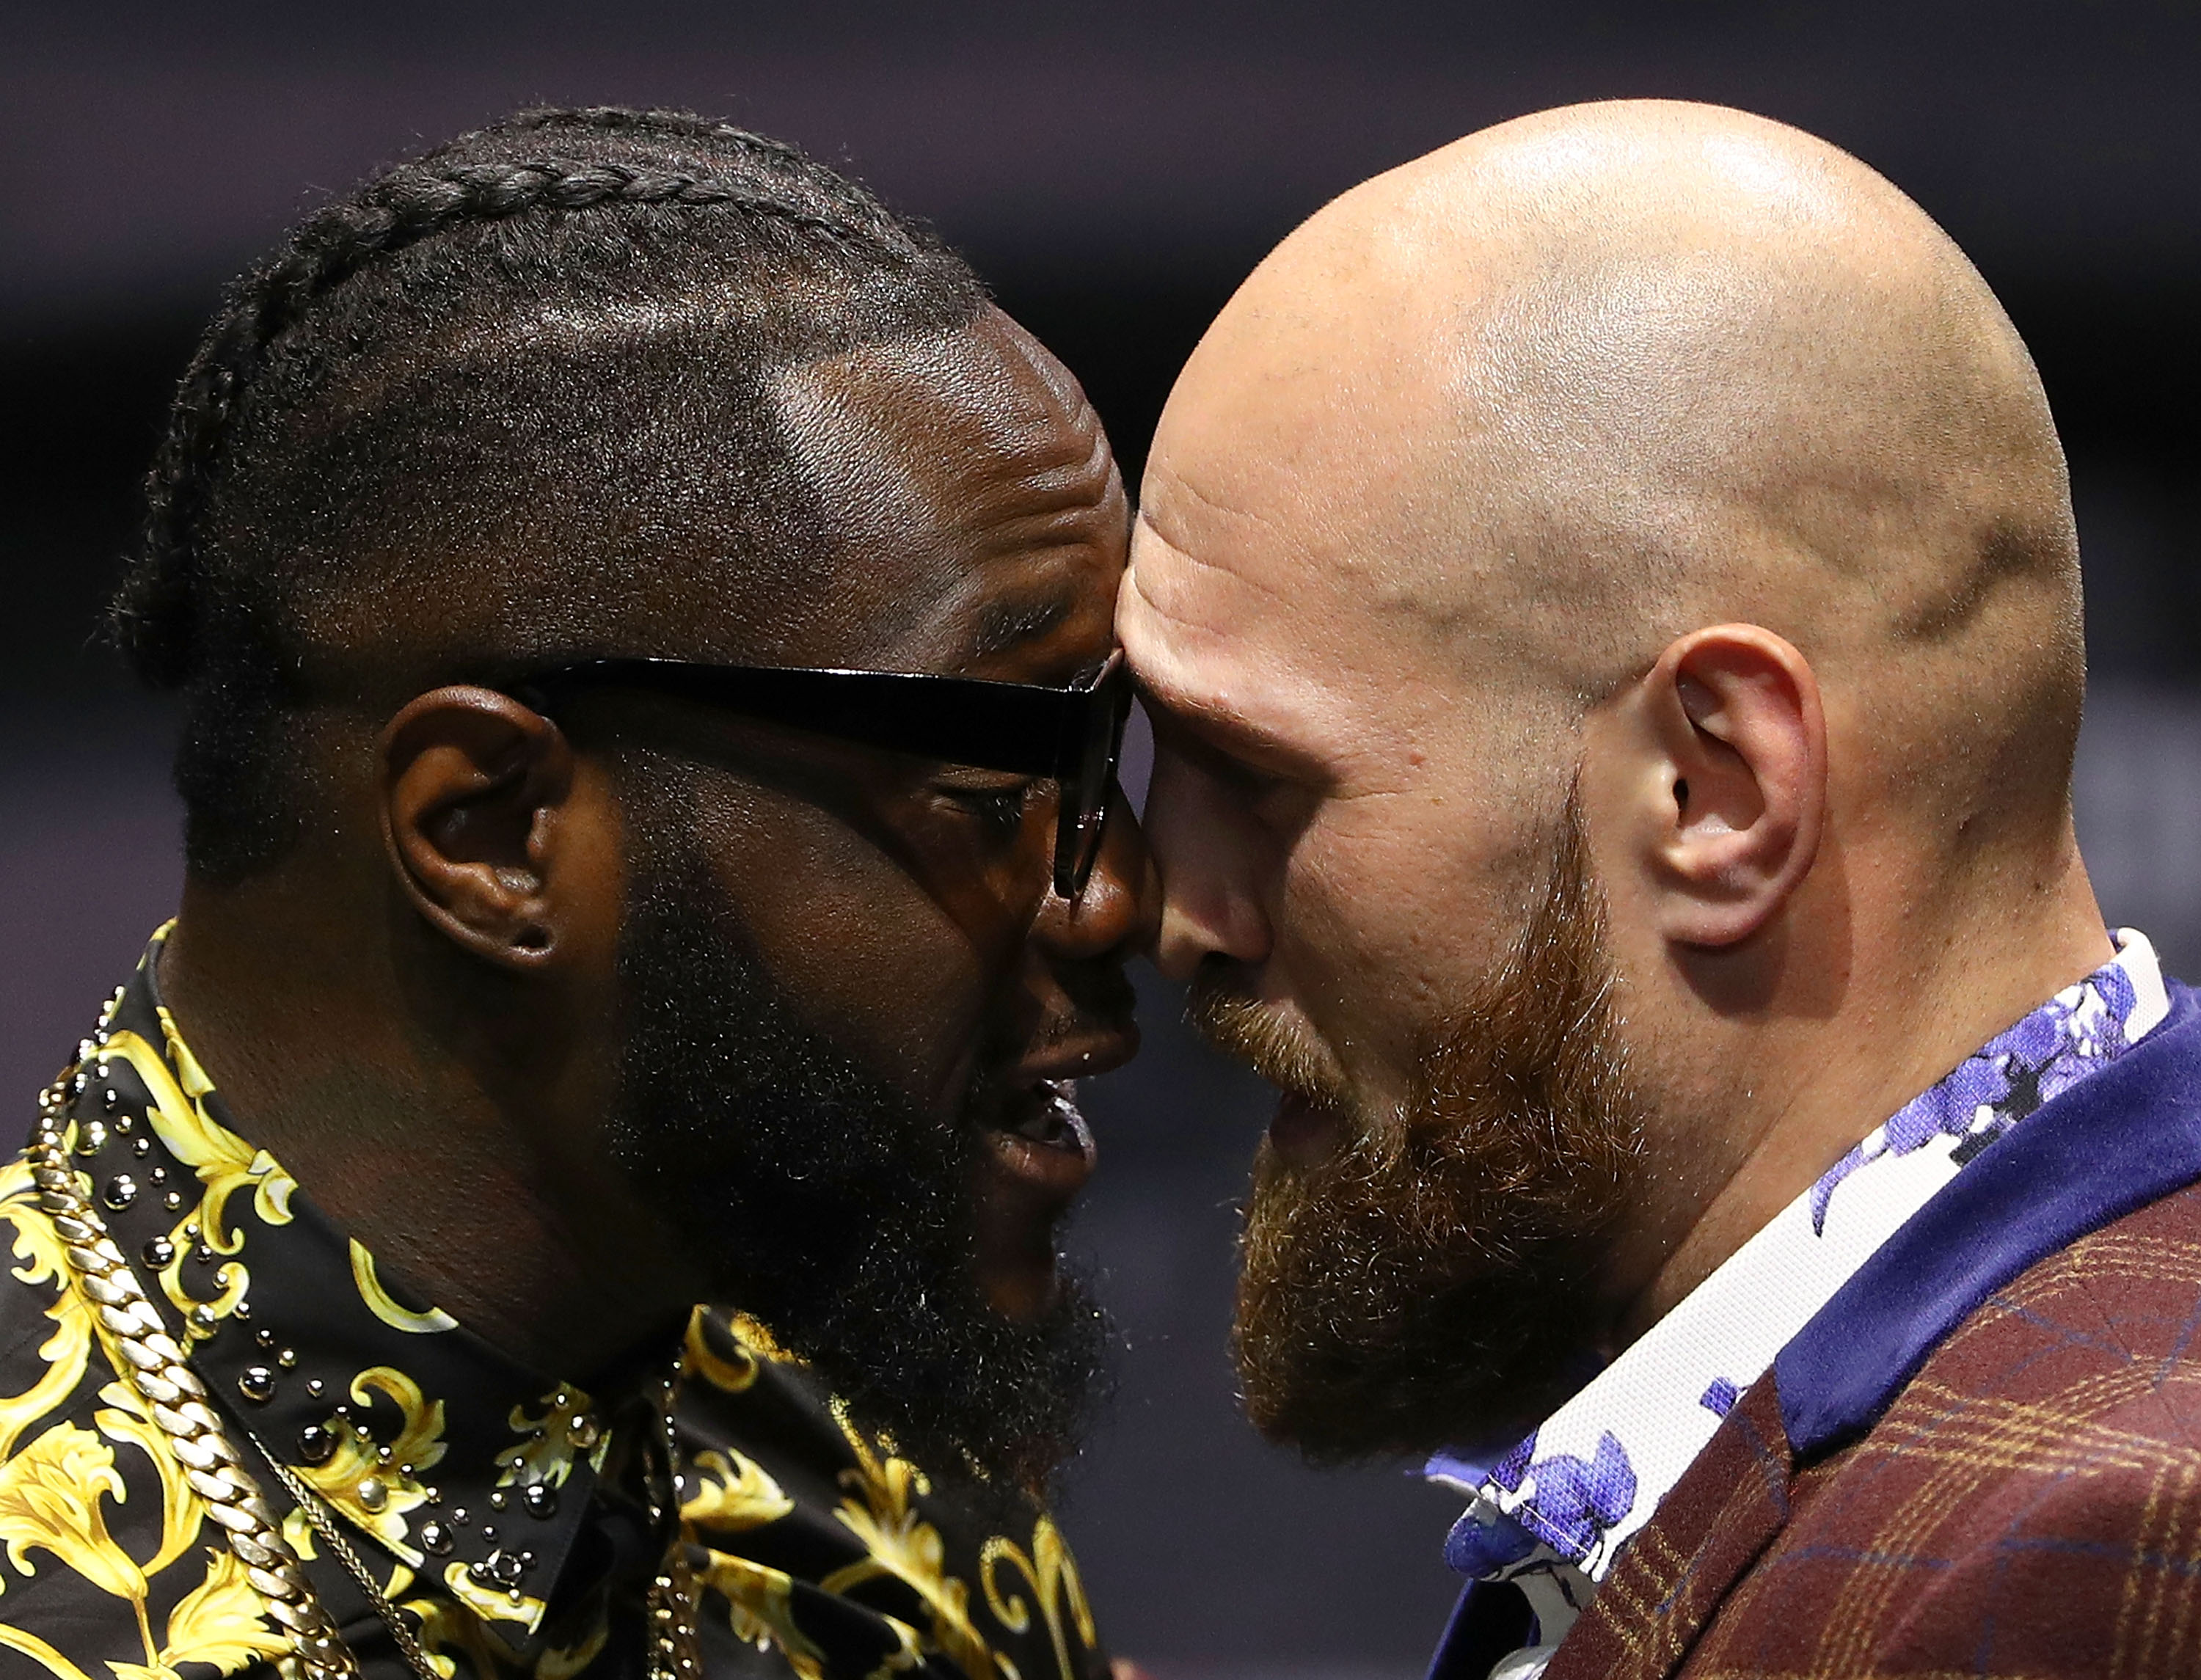 Deontay Wilder-Tyson Fury III live stream (10/9) How to watch online, time, full card